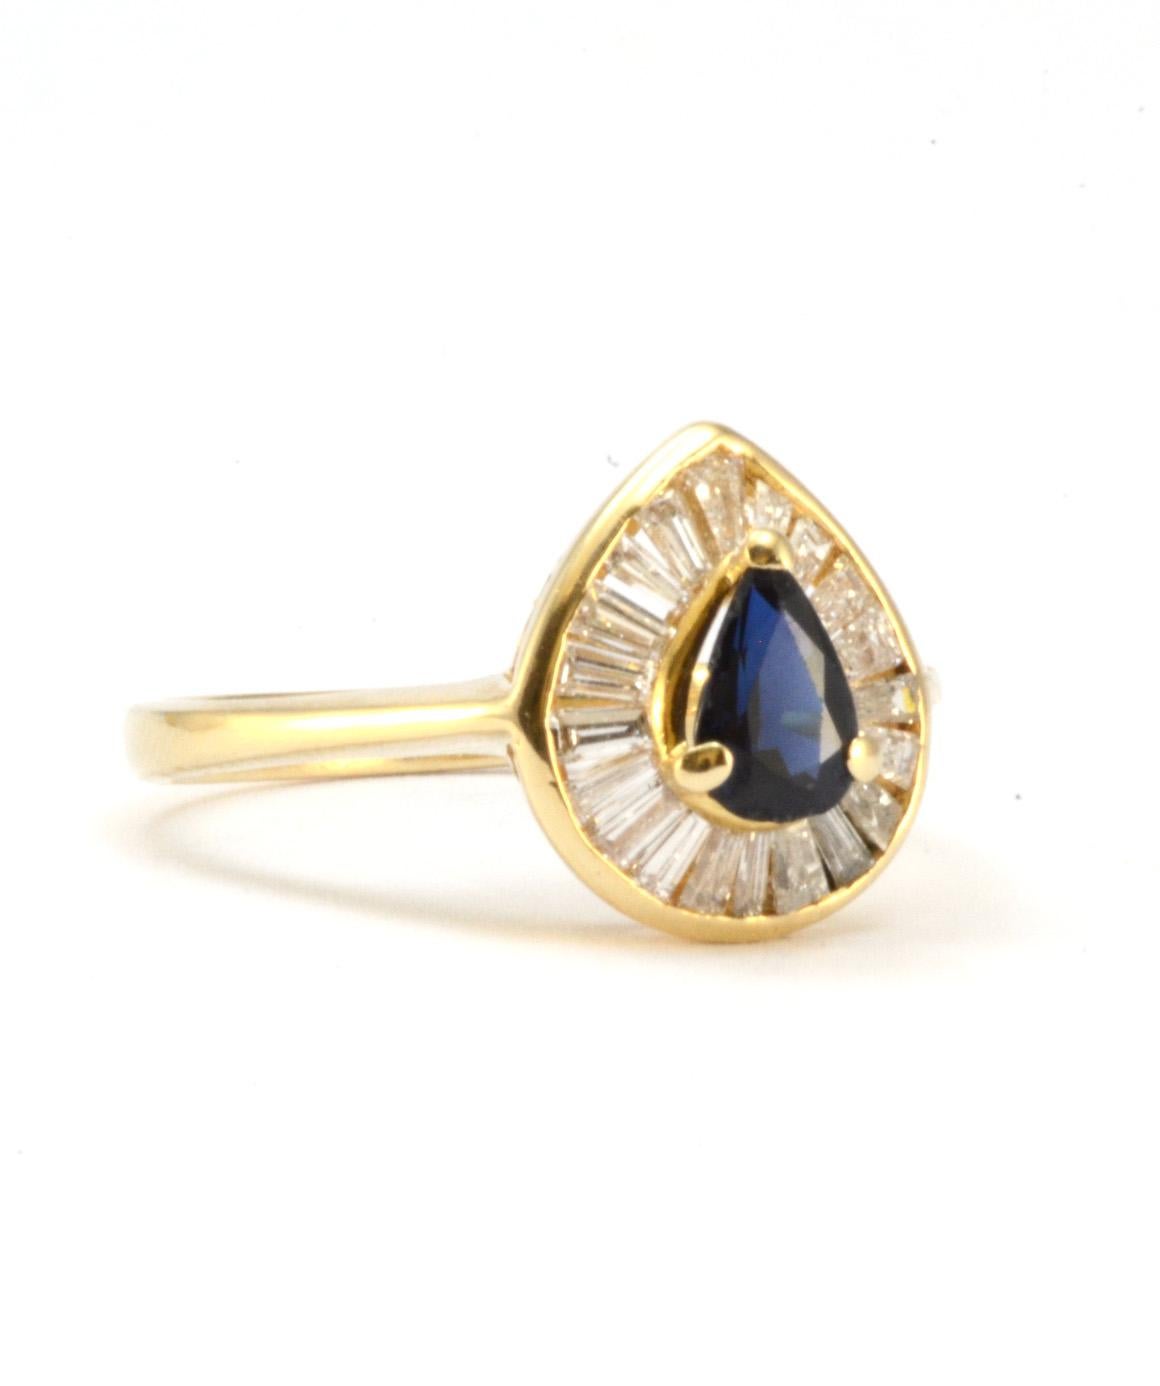 Solid 14K Yellow Gold Genuine Sapphire & Natural Diamond Ring! This ring is in excellent condition. It weighs about 2.6 grams, and is a size 5. There are about 20 baguette diamonds, approximately .04CTTW, and a center sapphire approximately .40ct.